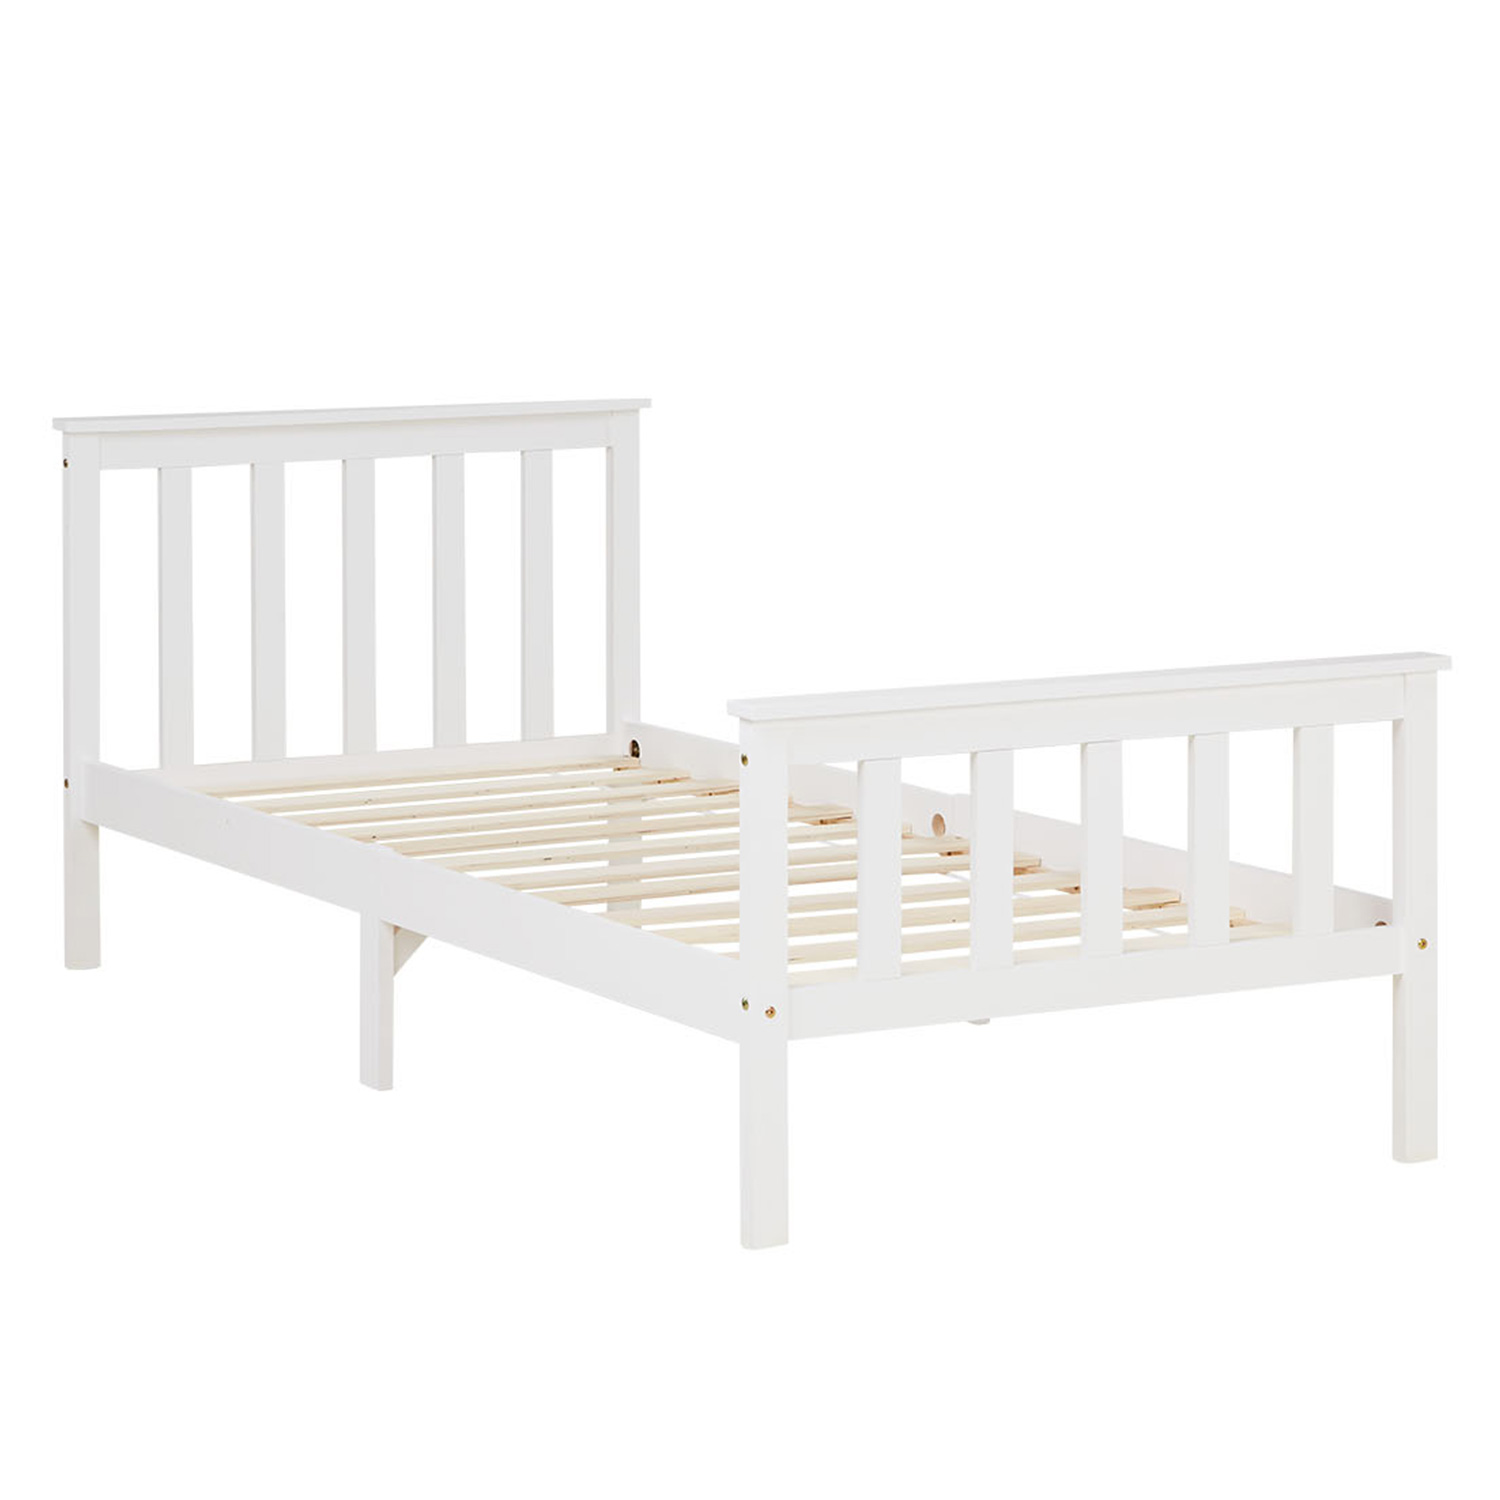 3FT single bed Solid pine wooden frame bed Shaker Style Daybed white guestbed